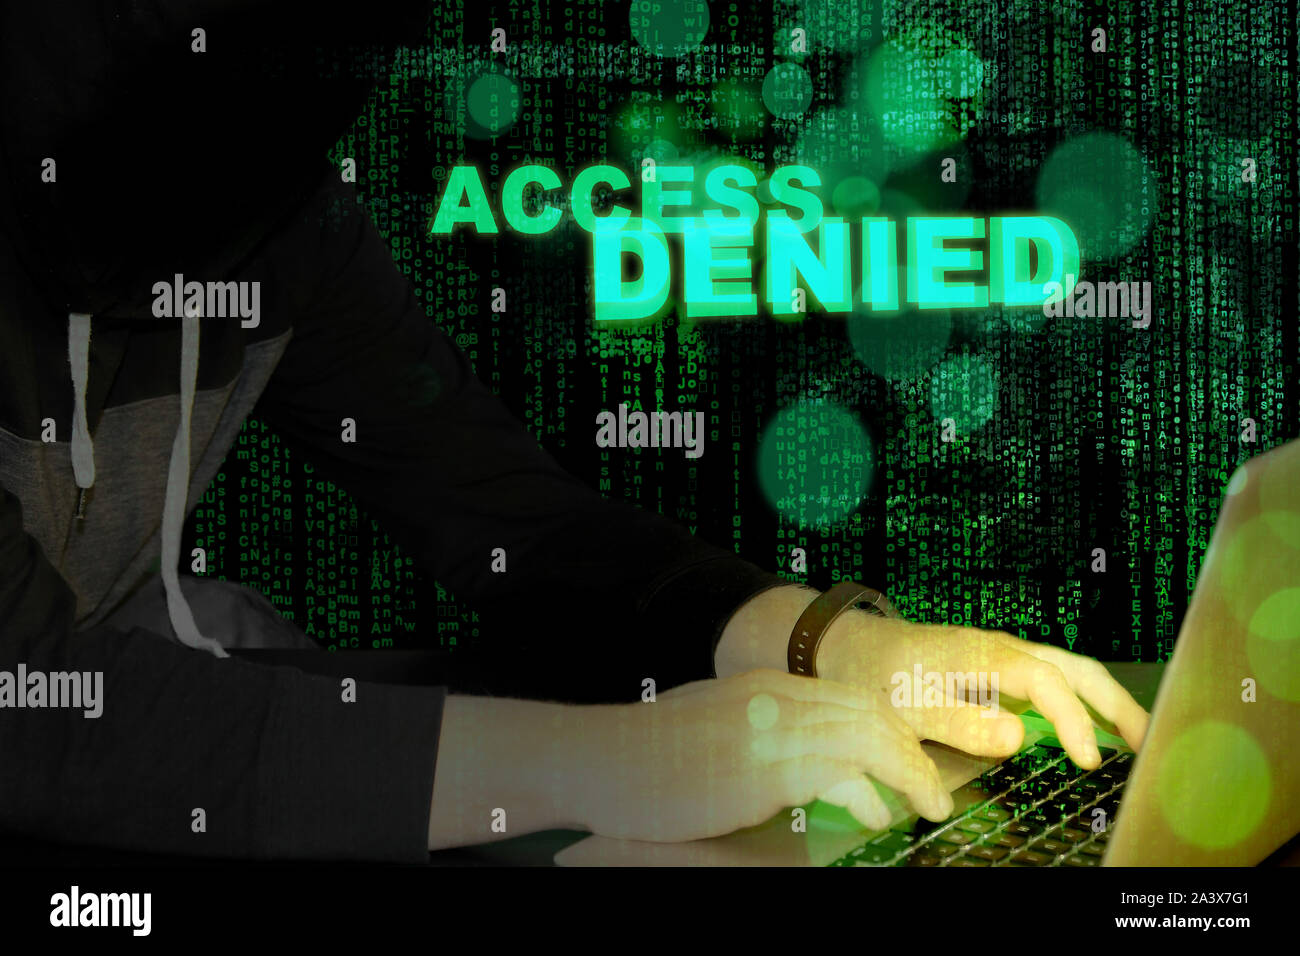 Access denied - hacker and laptop with code background Stock Photo